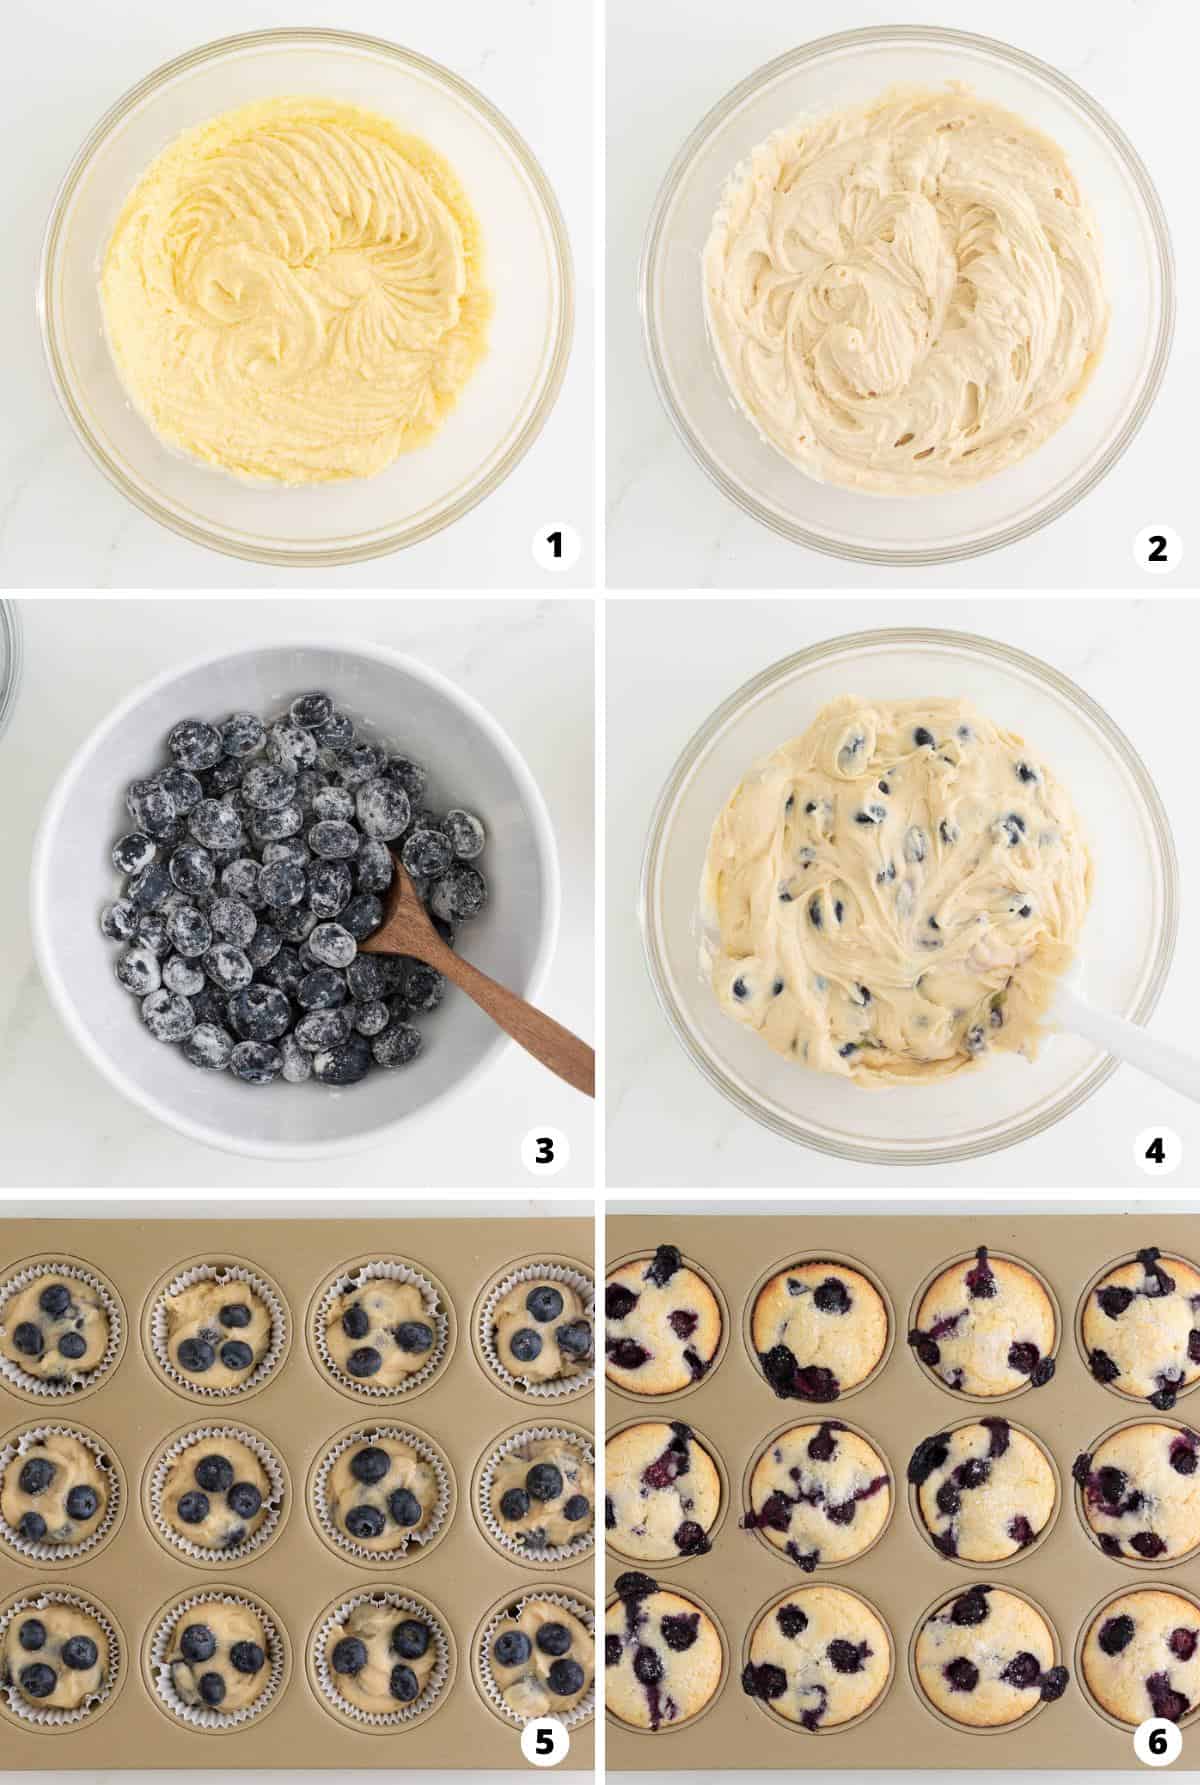 Showing how to make blueberry muffins in a 6 step collage.